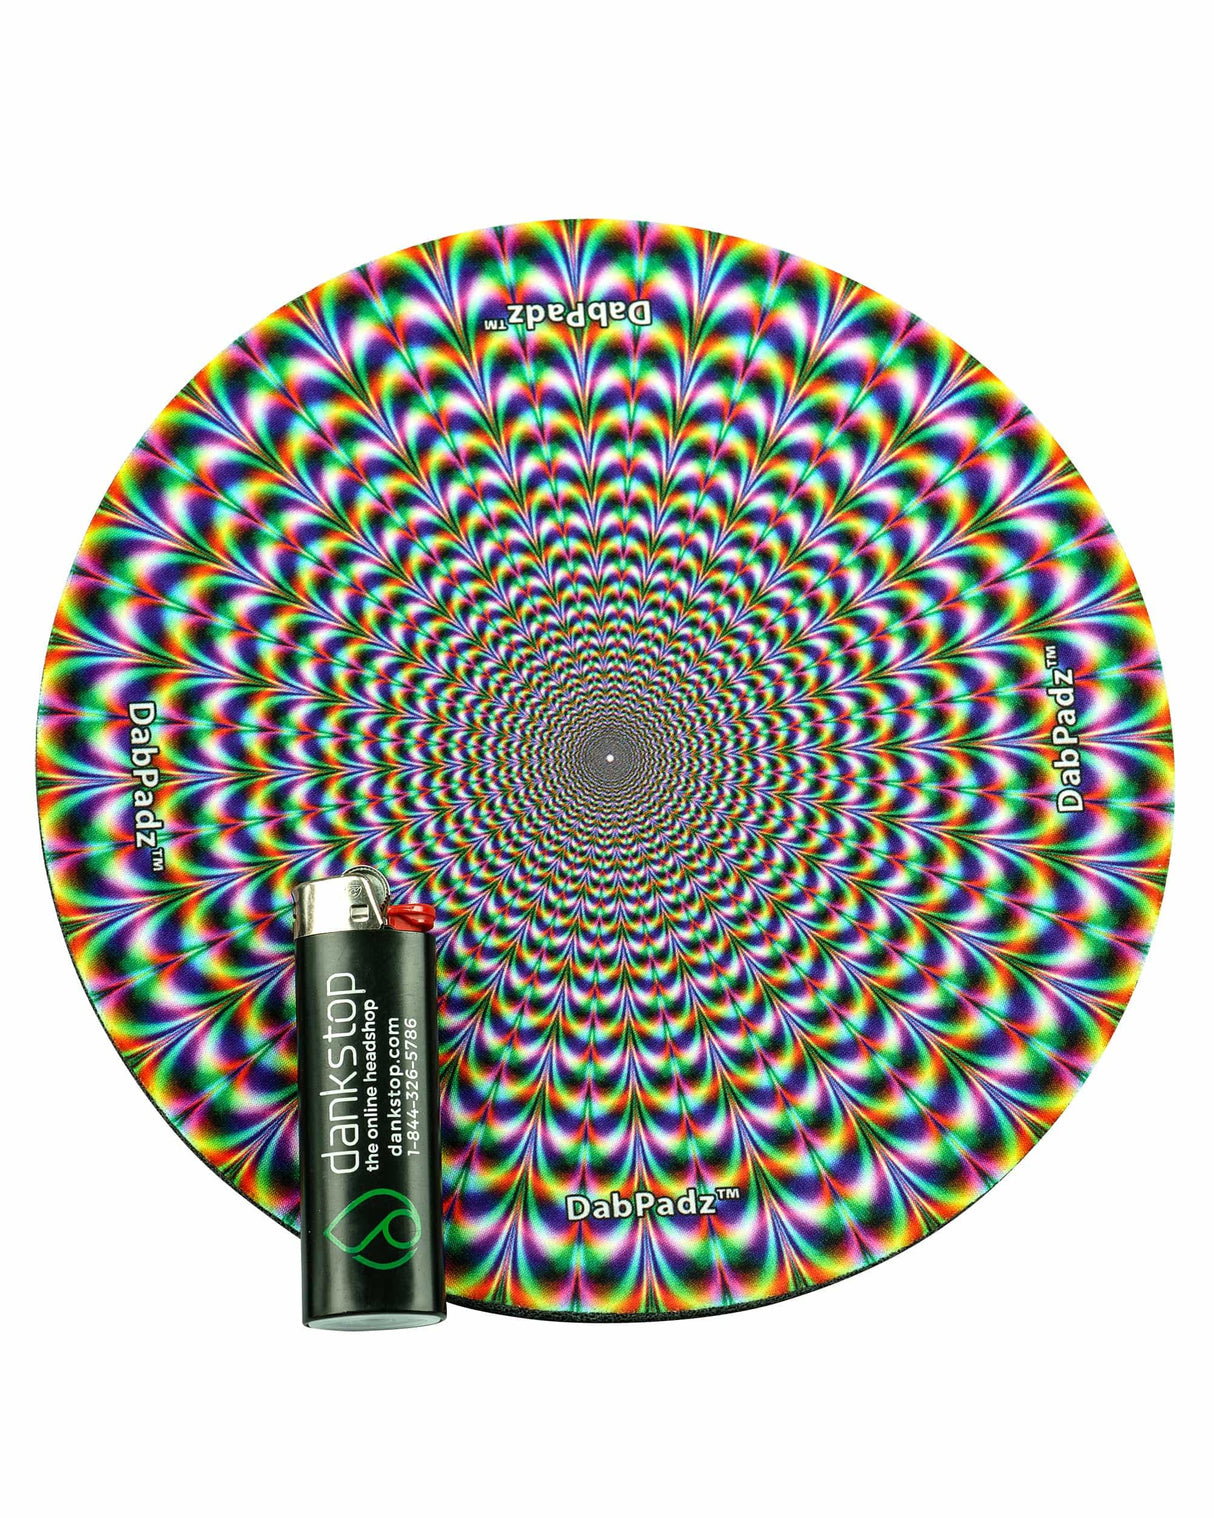 DabPadz 8" Rubber Dropmat with Psychedelic Pattern - Top View with Branded Lighter